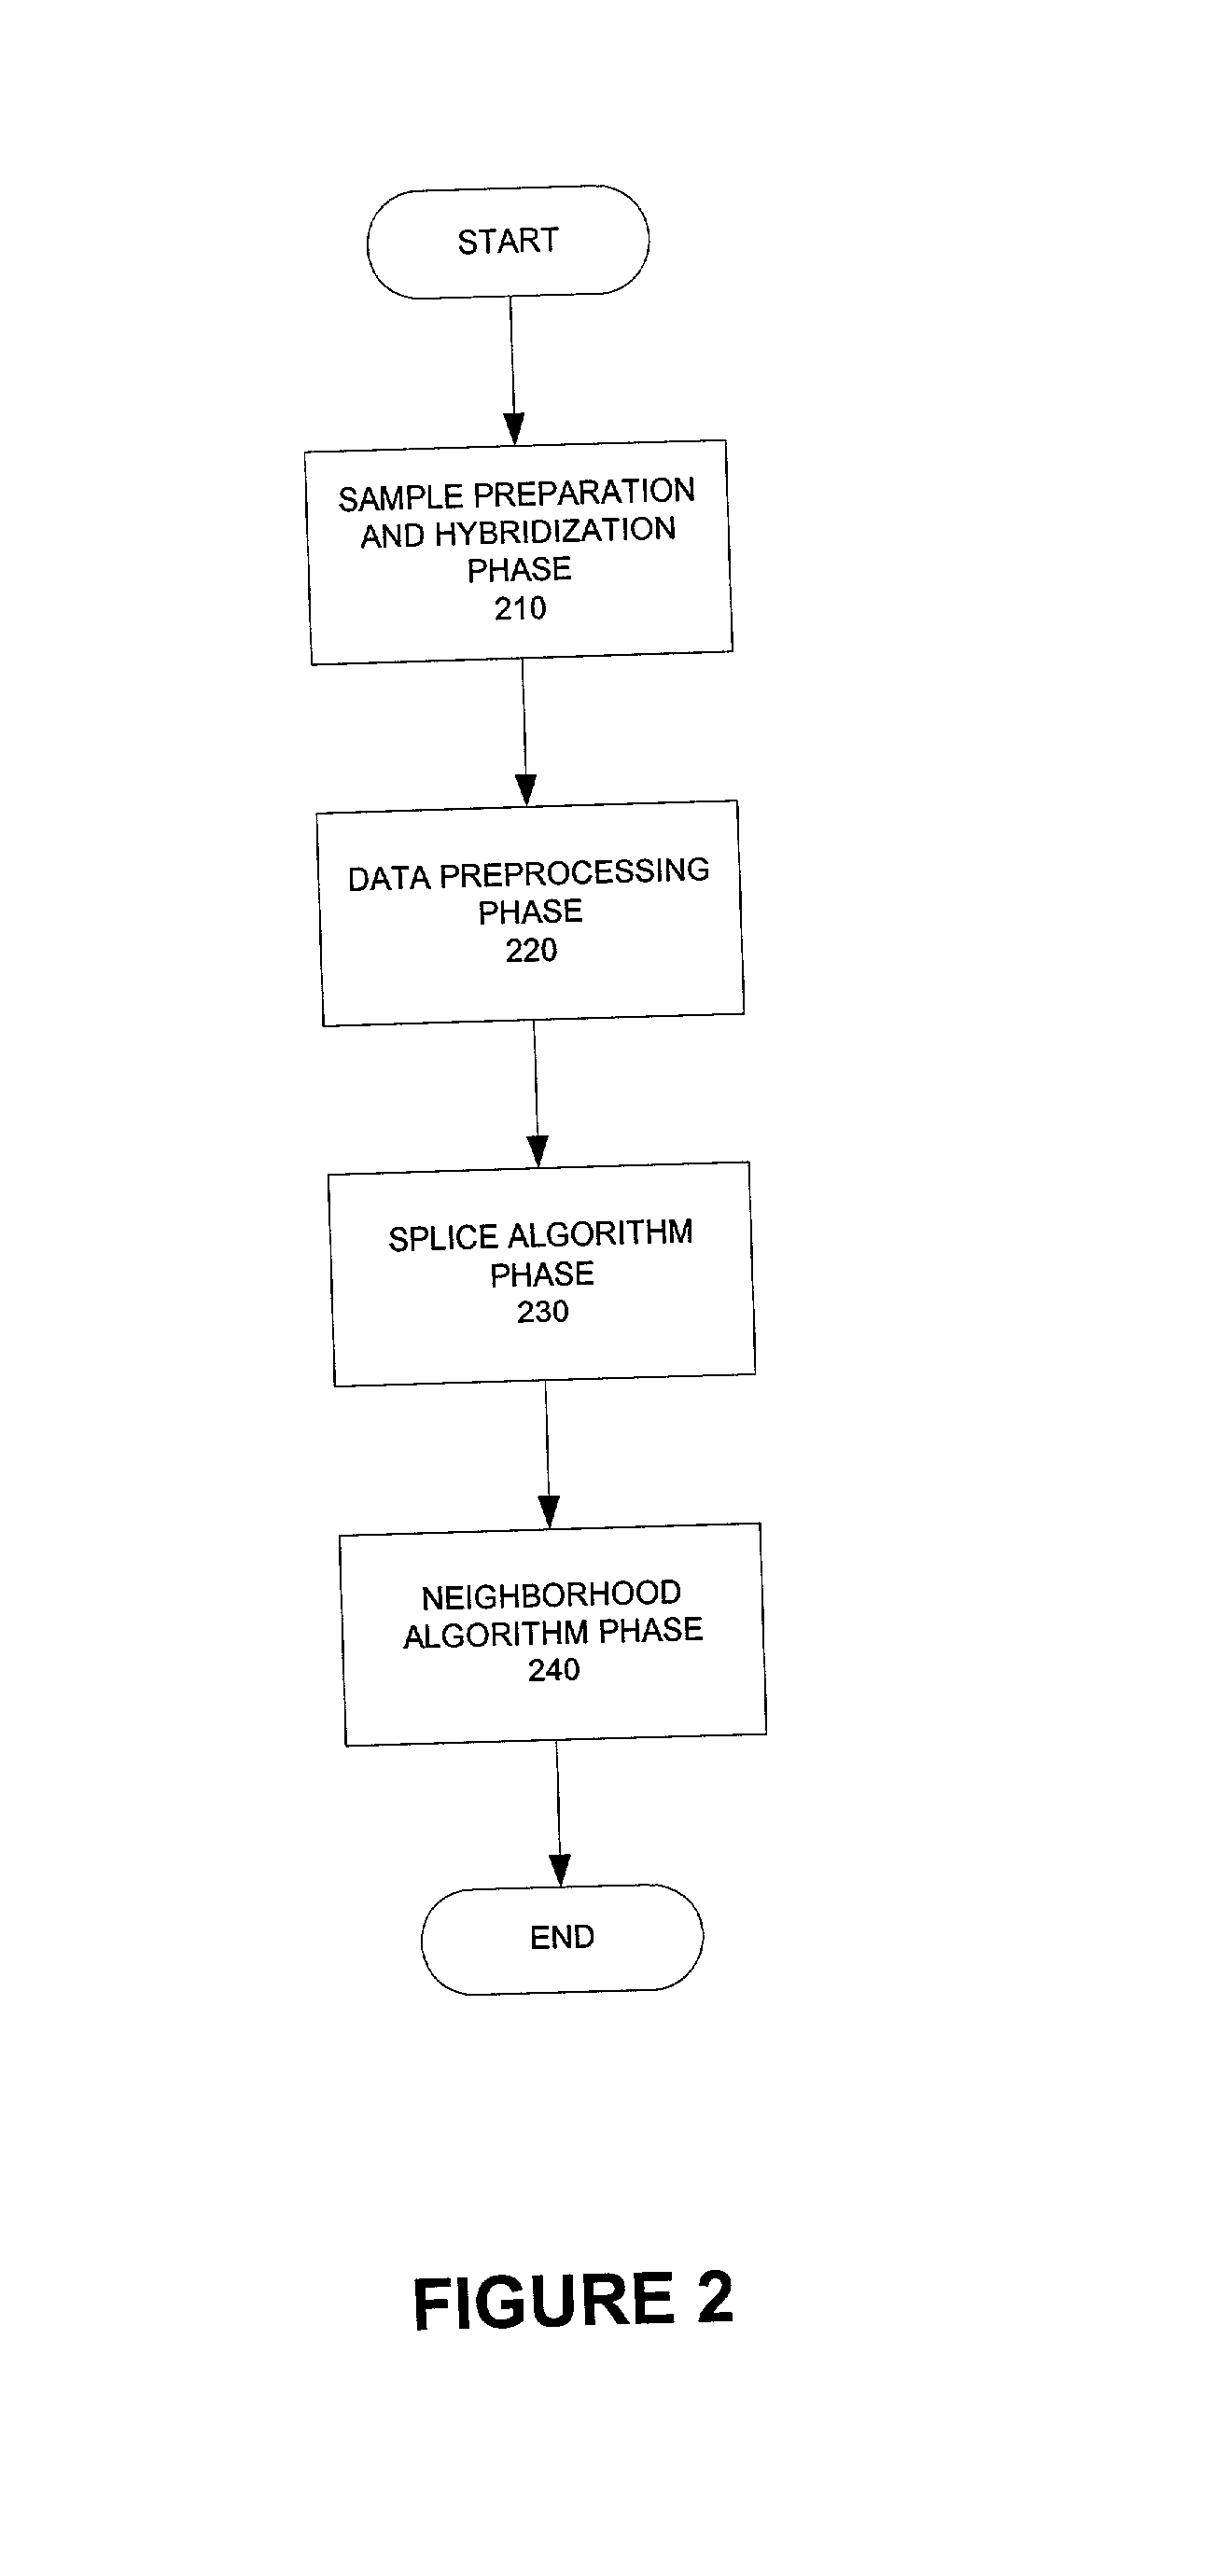 Method and system for predicting splice variant from DNA chip expression data